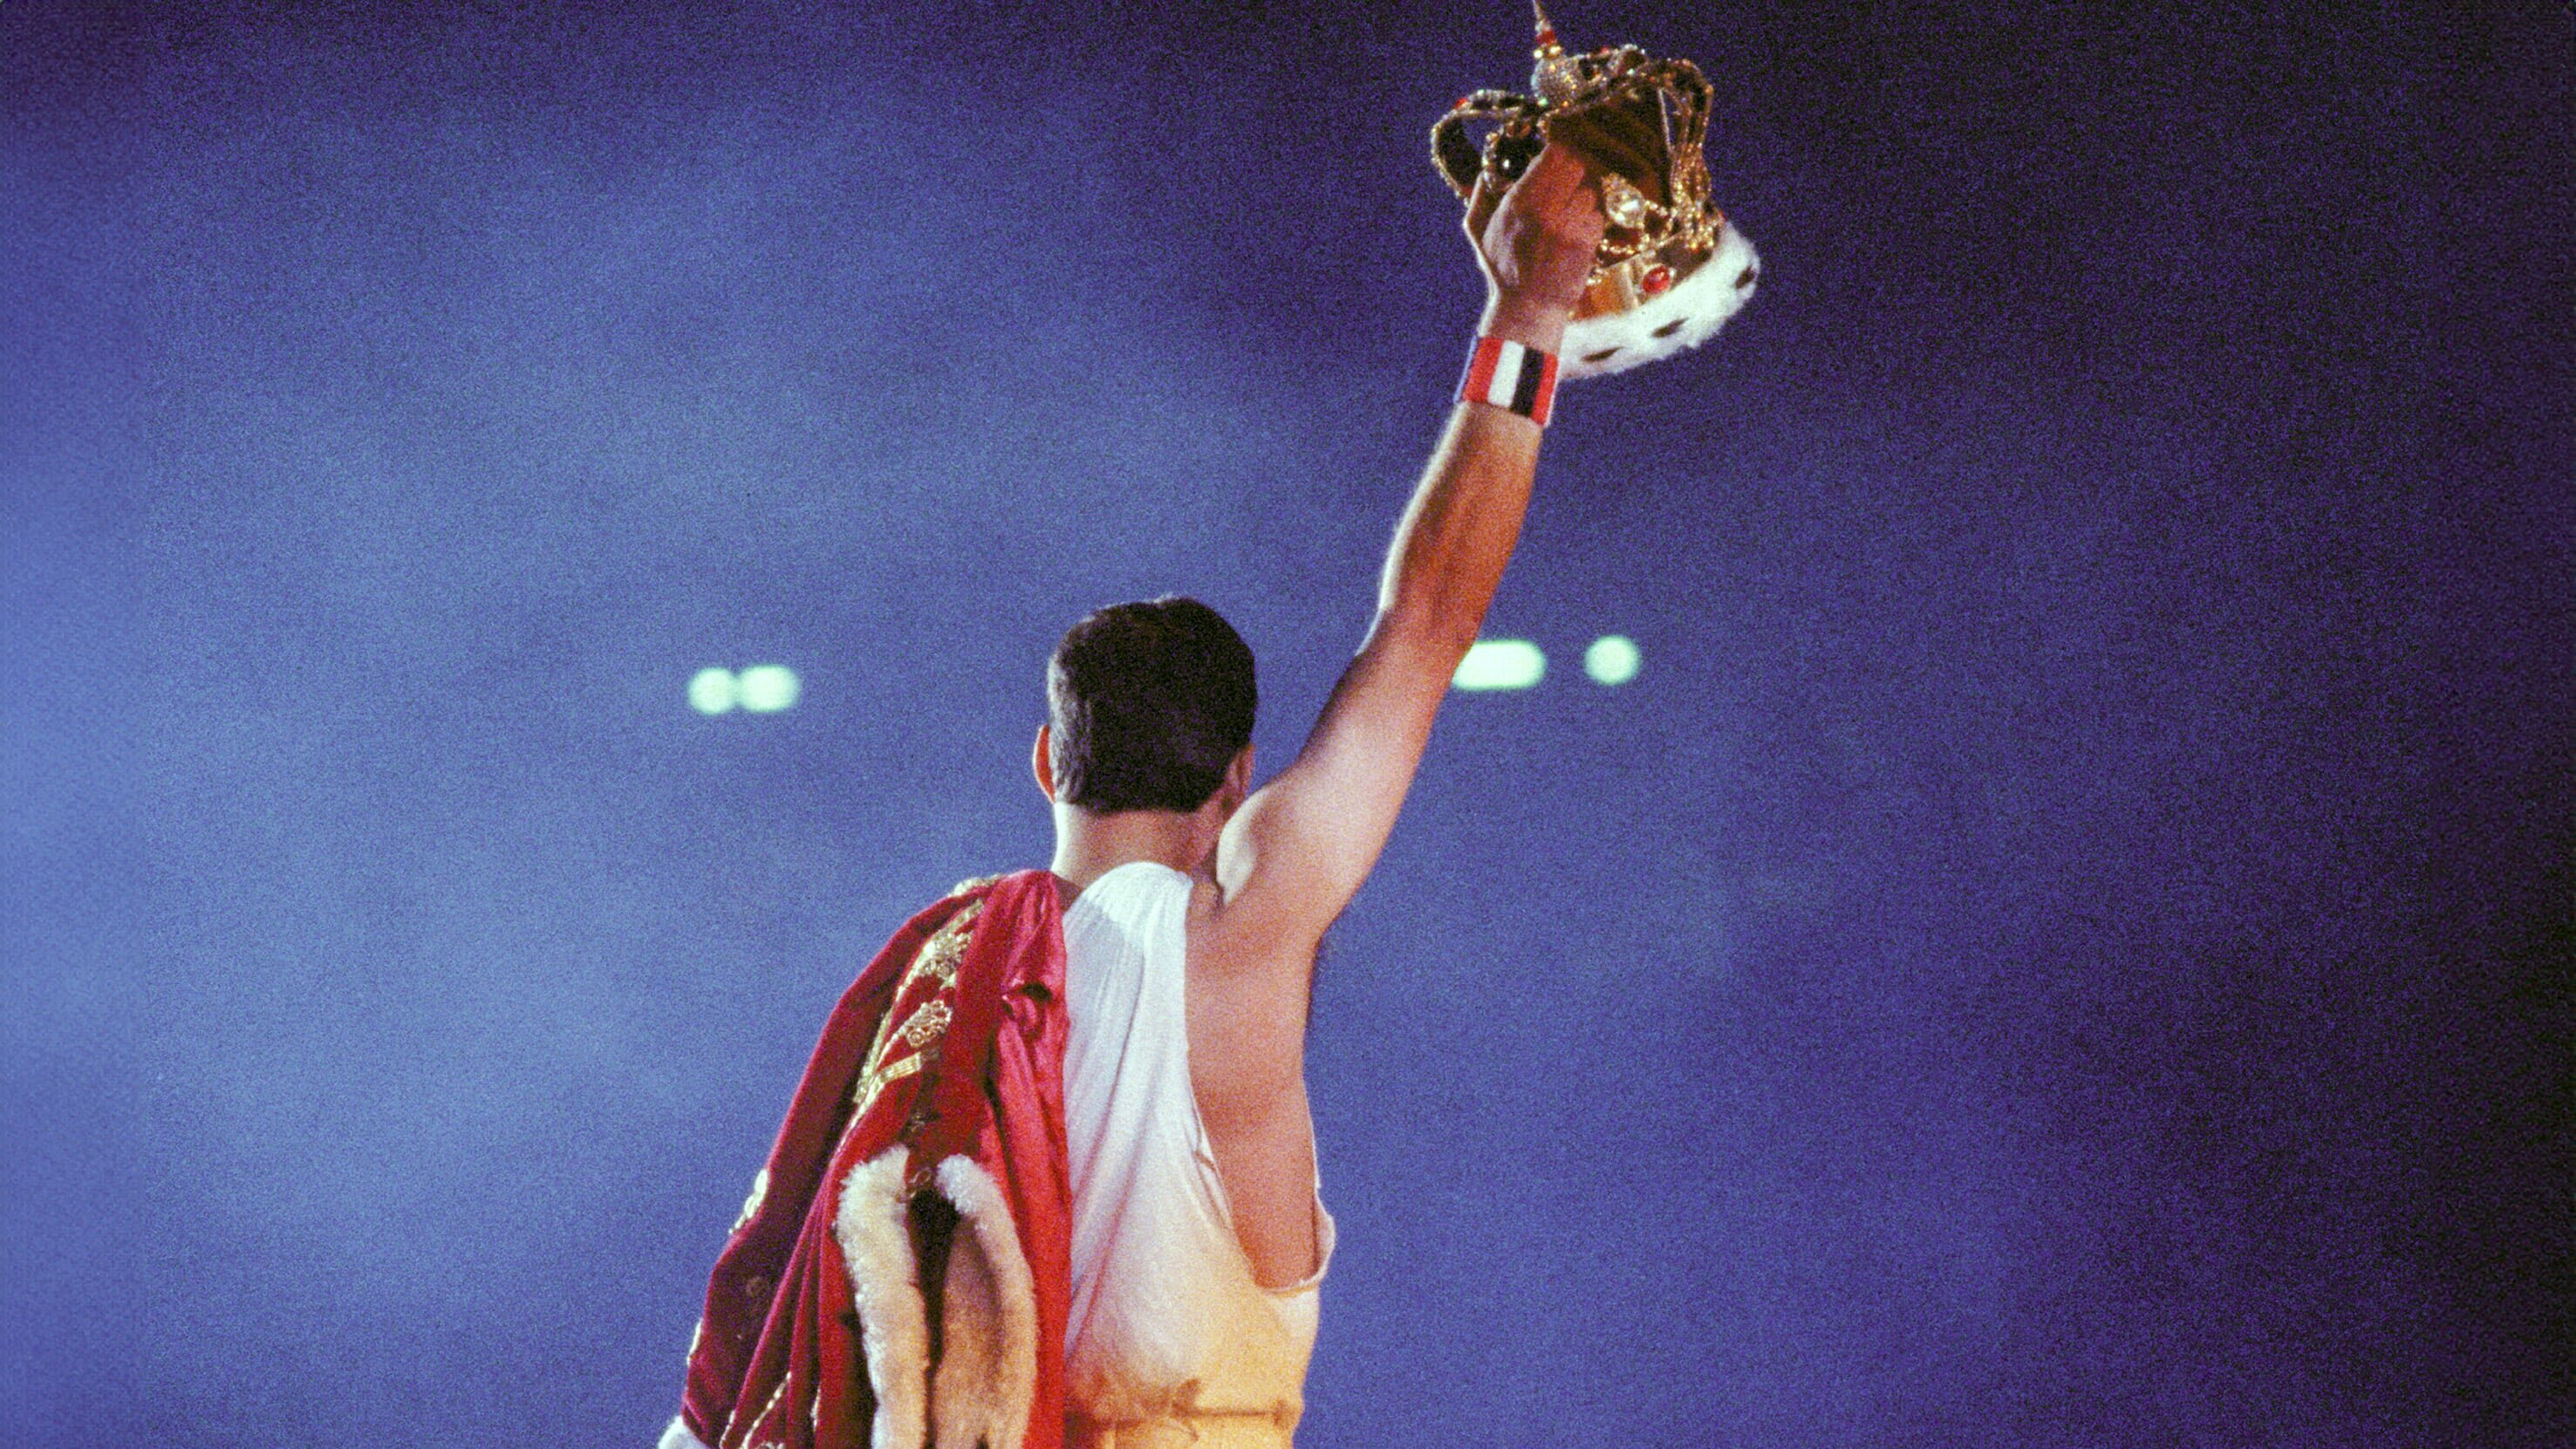 Queen, "We Are the Champions"